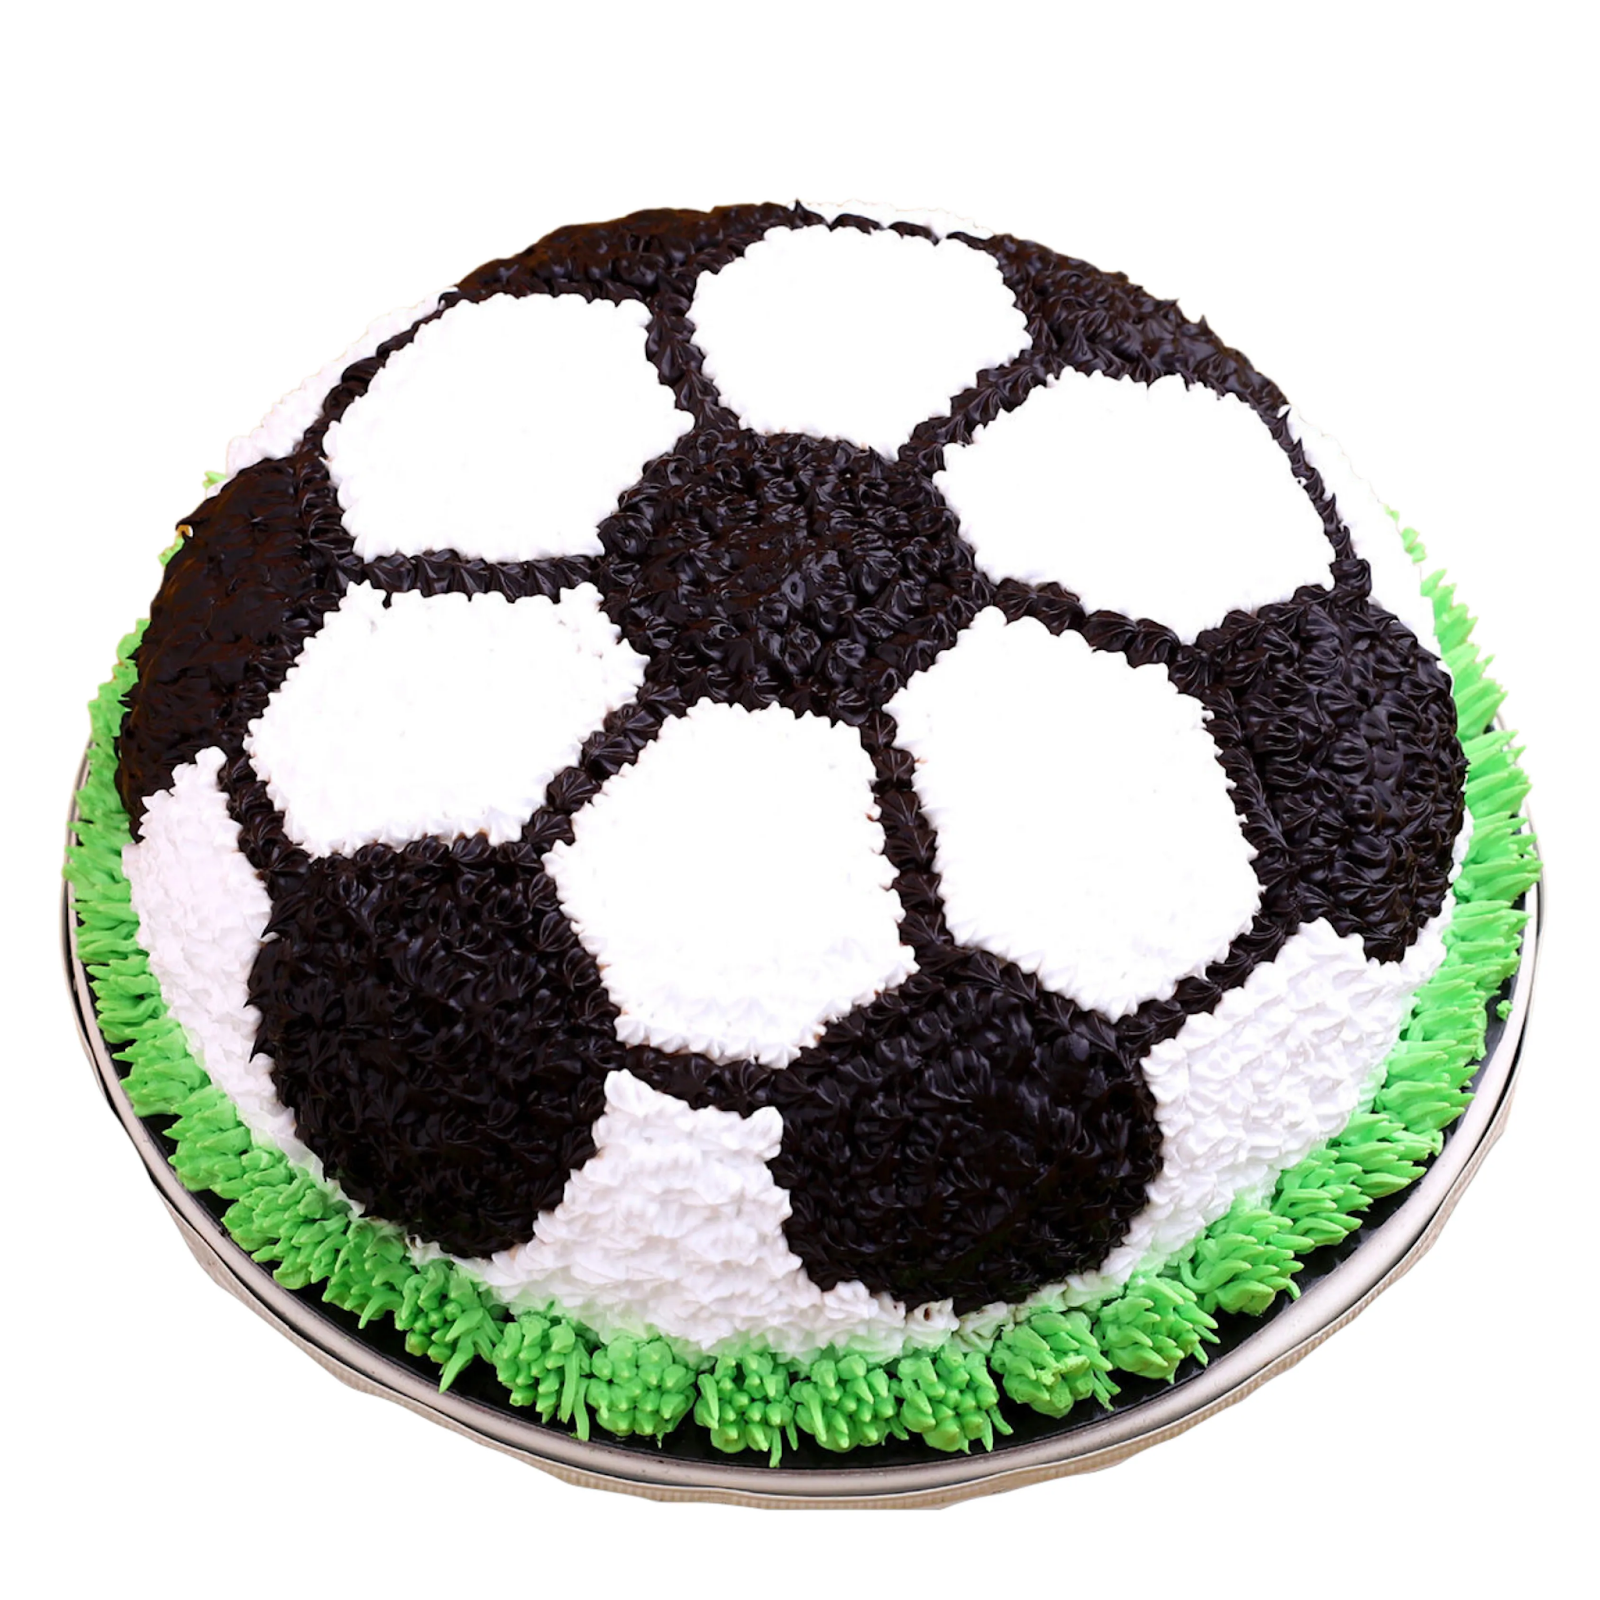 Football Chocolate Designer Cake by Belly Amy's